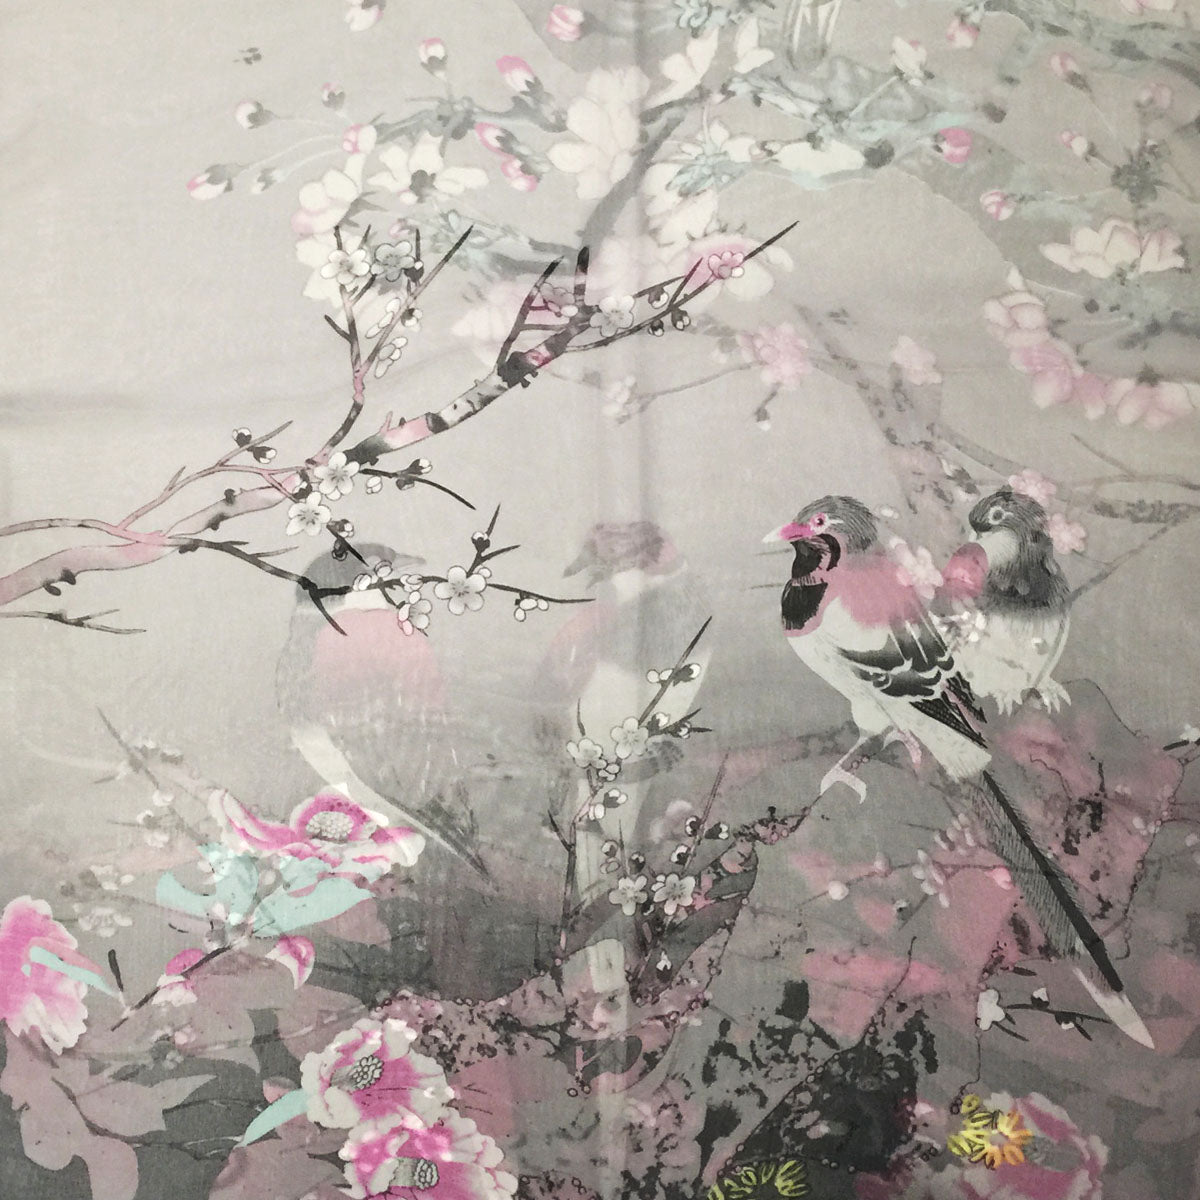 Wrapables Floral Bird Print Polyester and Silk Oblong Scarf, Twilight Dusk